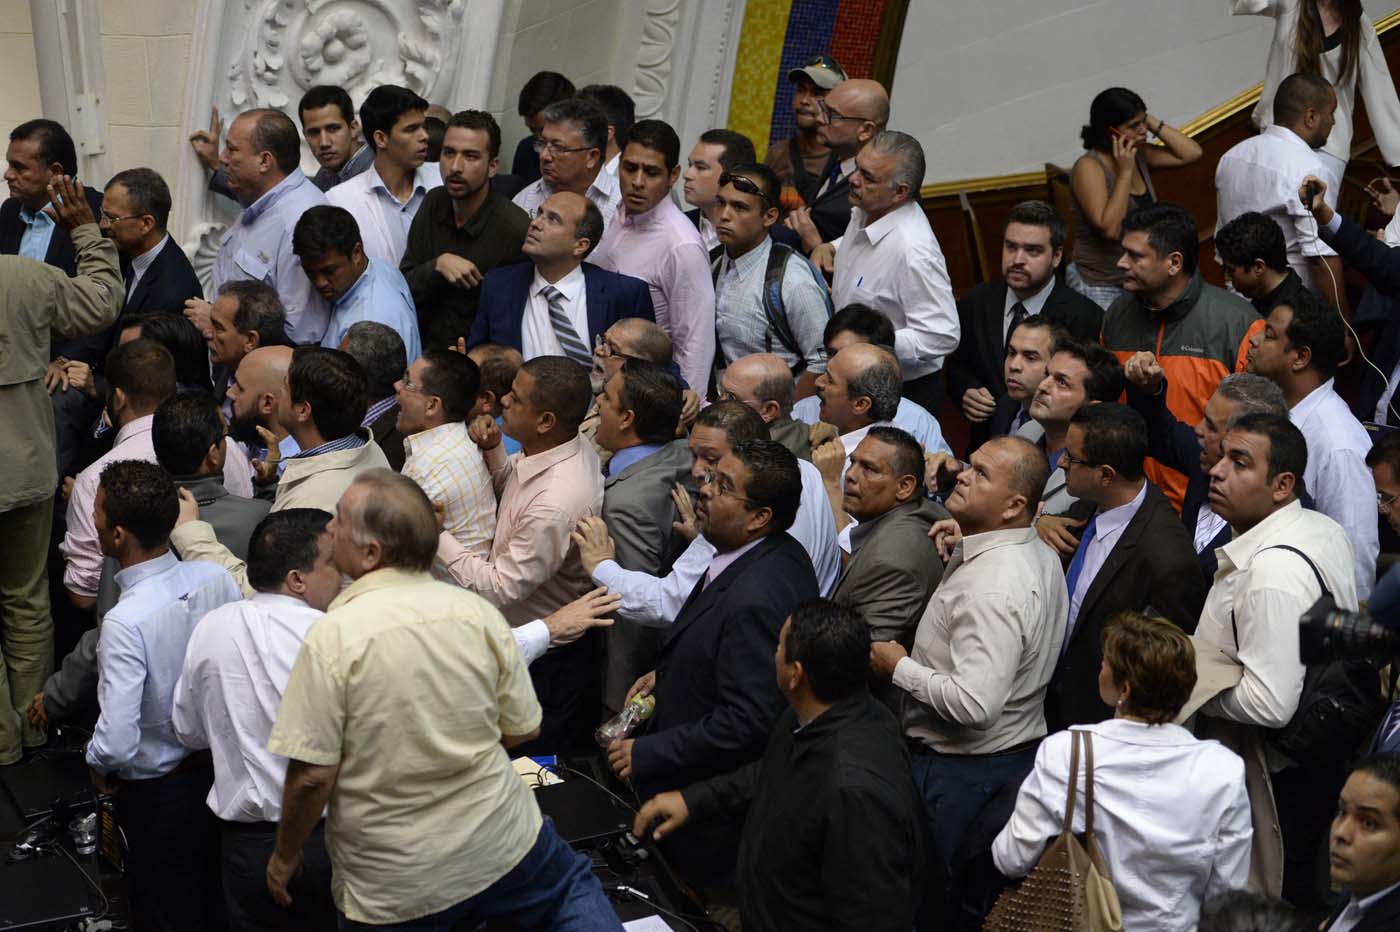 Members of the National Assembly react as supporters of Venezuelan President Nicolas Maduro force their way during an extraordinary session called by opposition leaders, in Caracas on October 23, 2016. The opposition Democratic Unity Movement (MUD) called a Parliamentary session to debate putting President Nicolas Maduro on trial to "restore democracy" in an emergency session that descended into chaos as supporters of the leftist leader briefly seized the chamber. / AFP PHOTO / FEDERICO PARRA